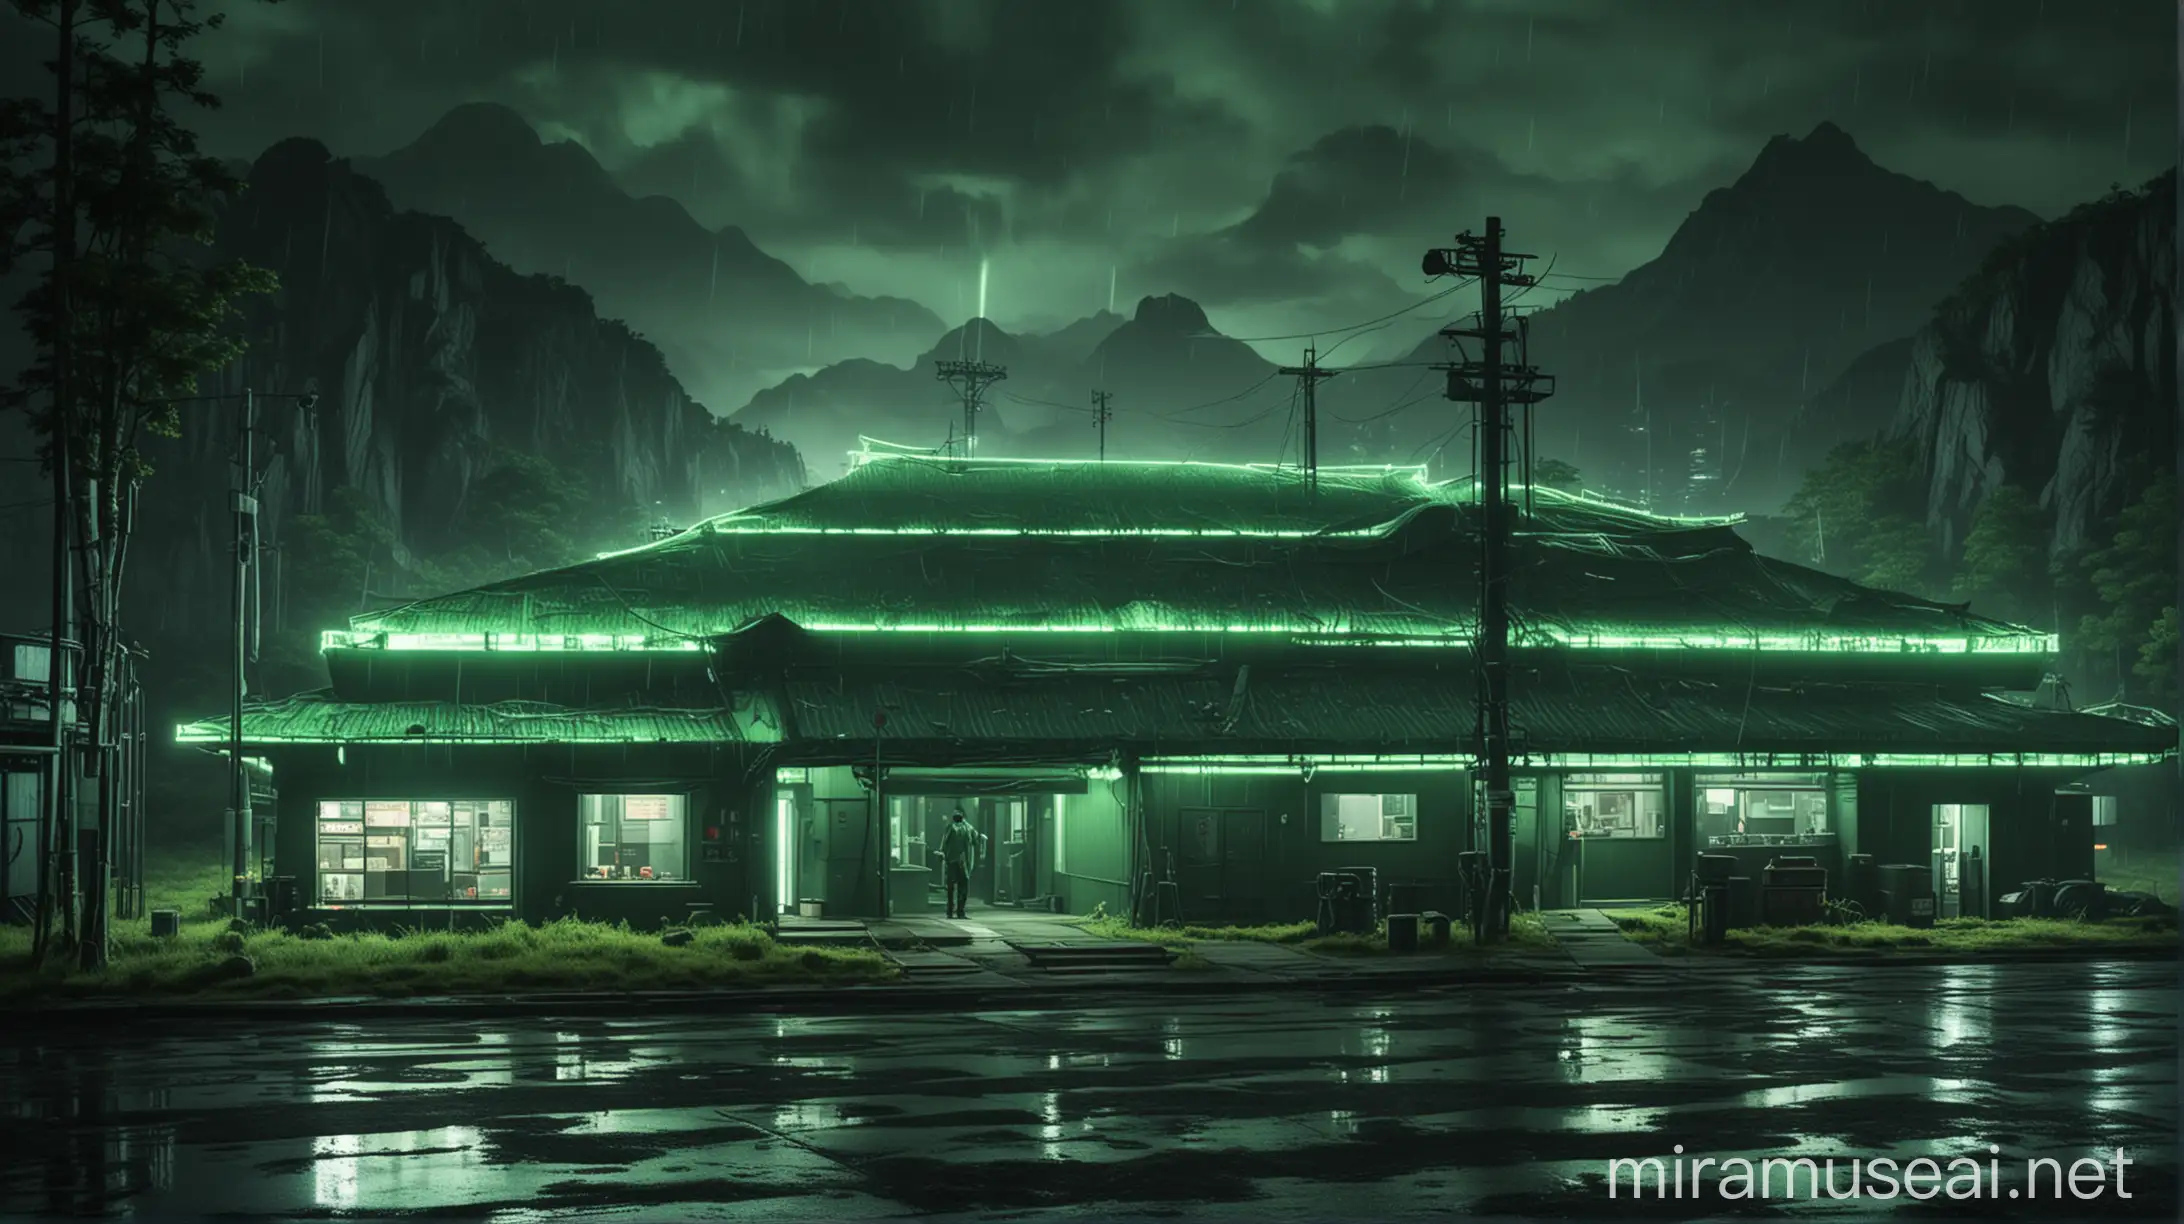 Realistic Japanese research centers buildings with one worker around it, green neon and huge neon lights inside the part, its color shadow on the floor, Rainy weather, staff in dark green uniforms and helmets, Atmospheric and cinematic, The huge structures, A dark green smoke rose from the research centers environment and spread in the air, The image space is outside the realistic research center.
with huge satellite antennas,
A huge cubic green neon object,
in the Realistic mountains.
atmospheric and cinematic.
All overall dark green image theme.
Very big lights and lots of green neon lights.
The neon lights in the image should be very bright throughout the image.
The neon lights in the picture should be very bright in the dark
The neon lights in the picture should be very bright.
Very large and bright neon lamps in the structure.
Shades of green throughout the image.
3D.
Several large advanced and strange buildings nearby.
With large inscriptions on the structure.
Like Japanese sloping houses.